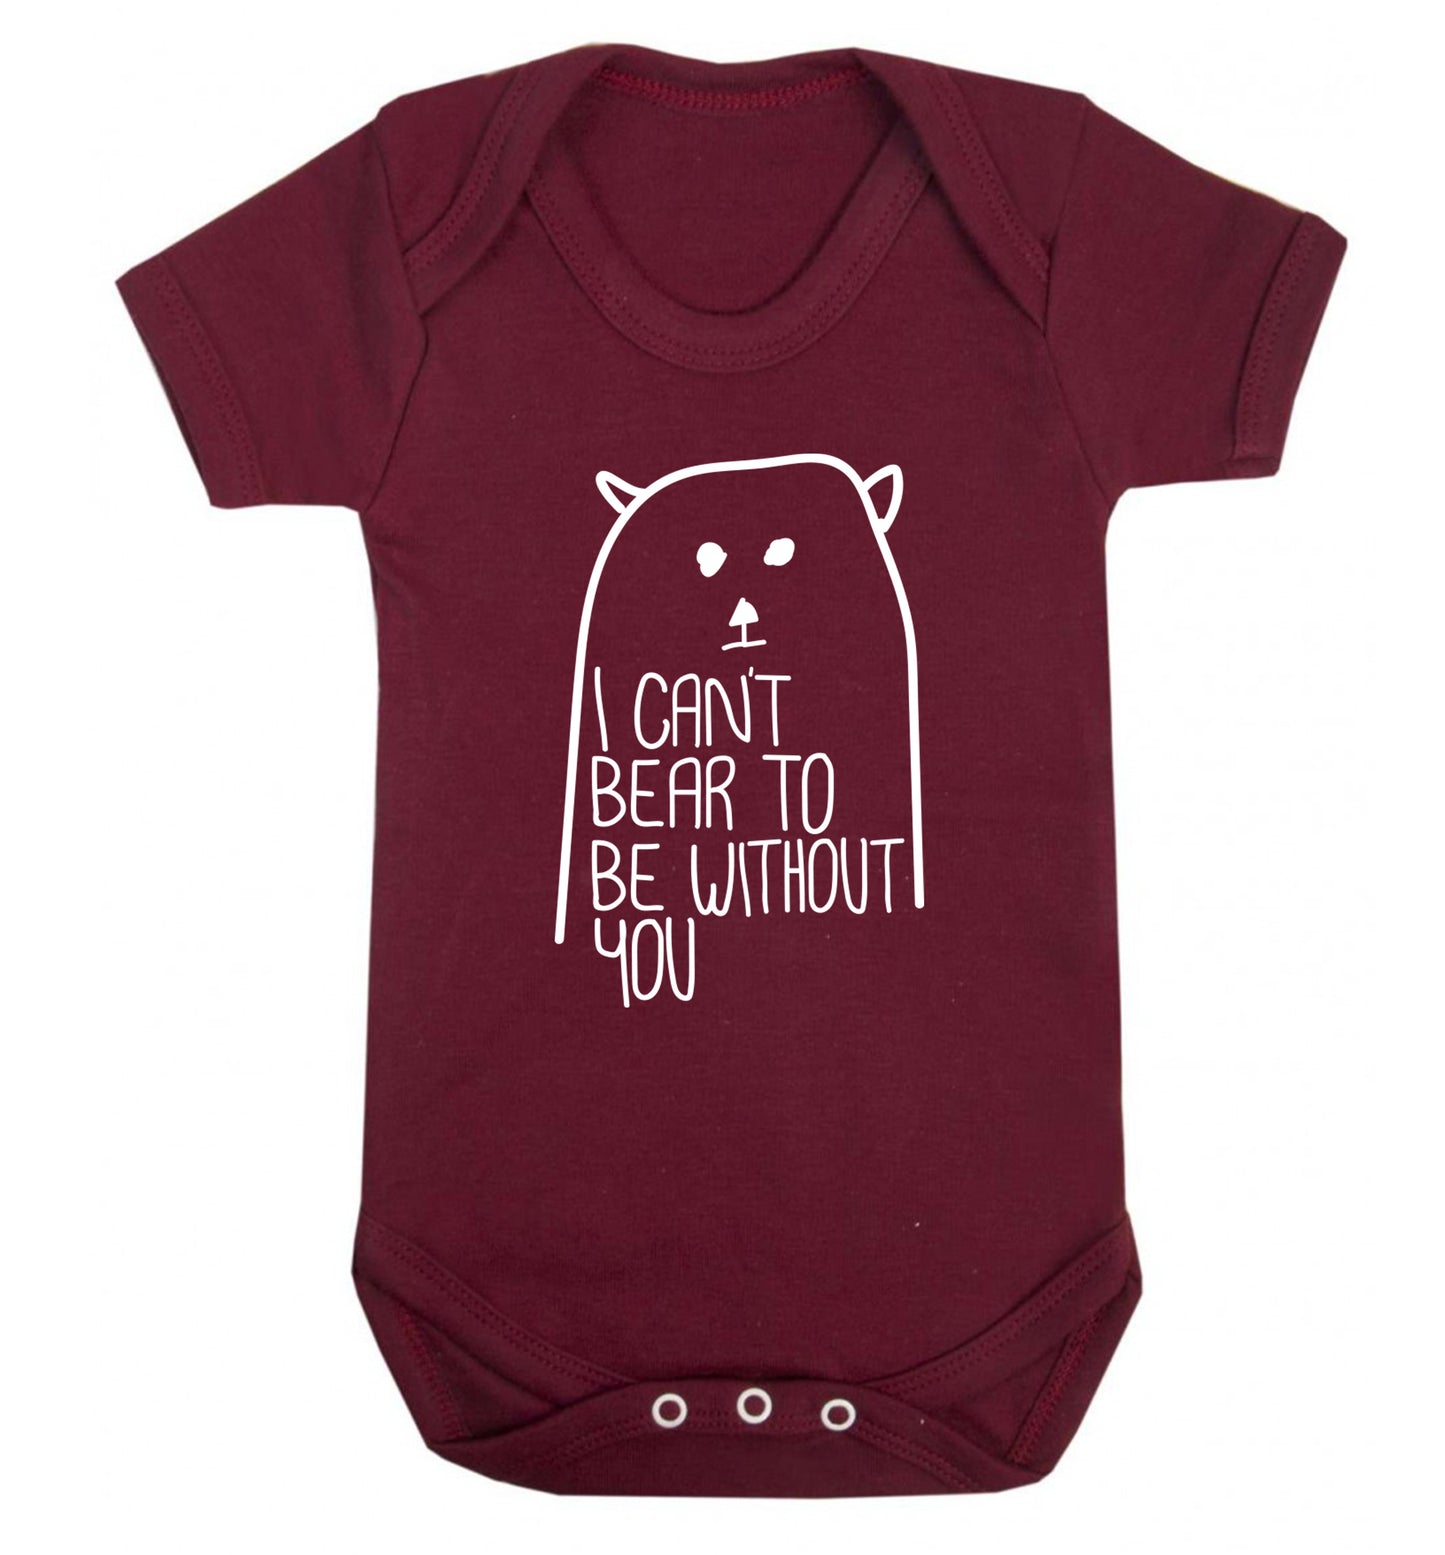 I can't bear to be without you Baby Vest maroon 18-24 months